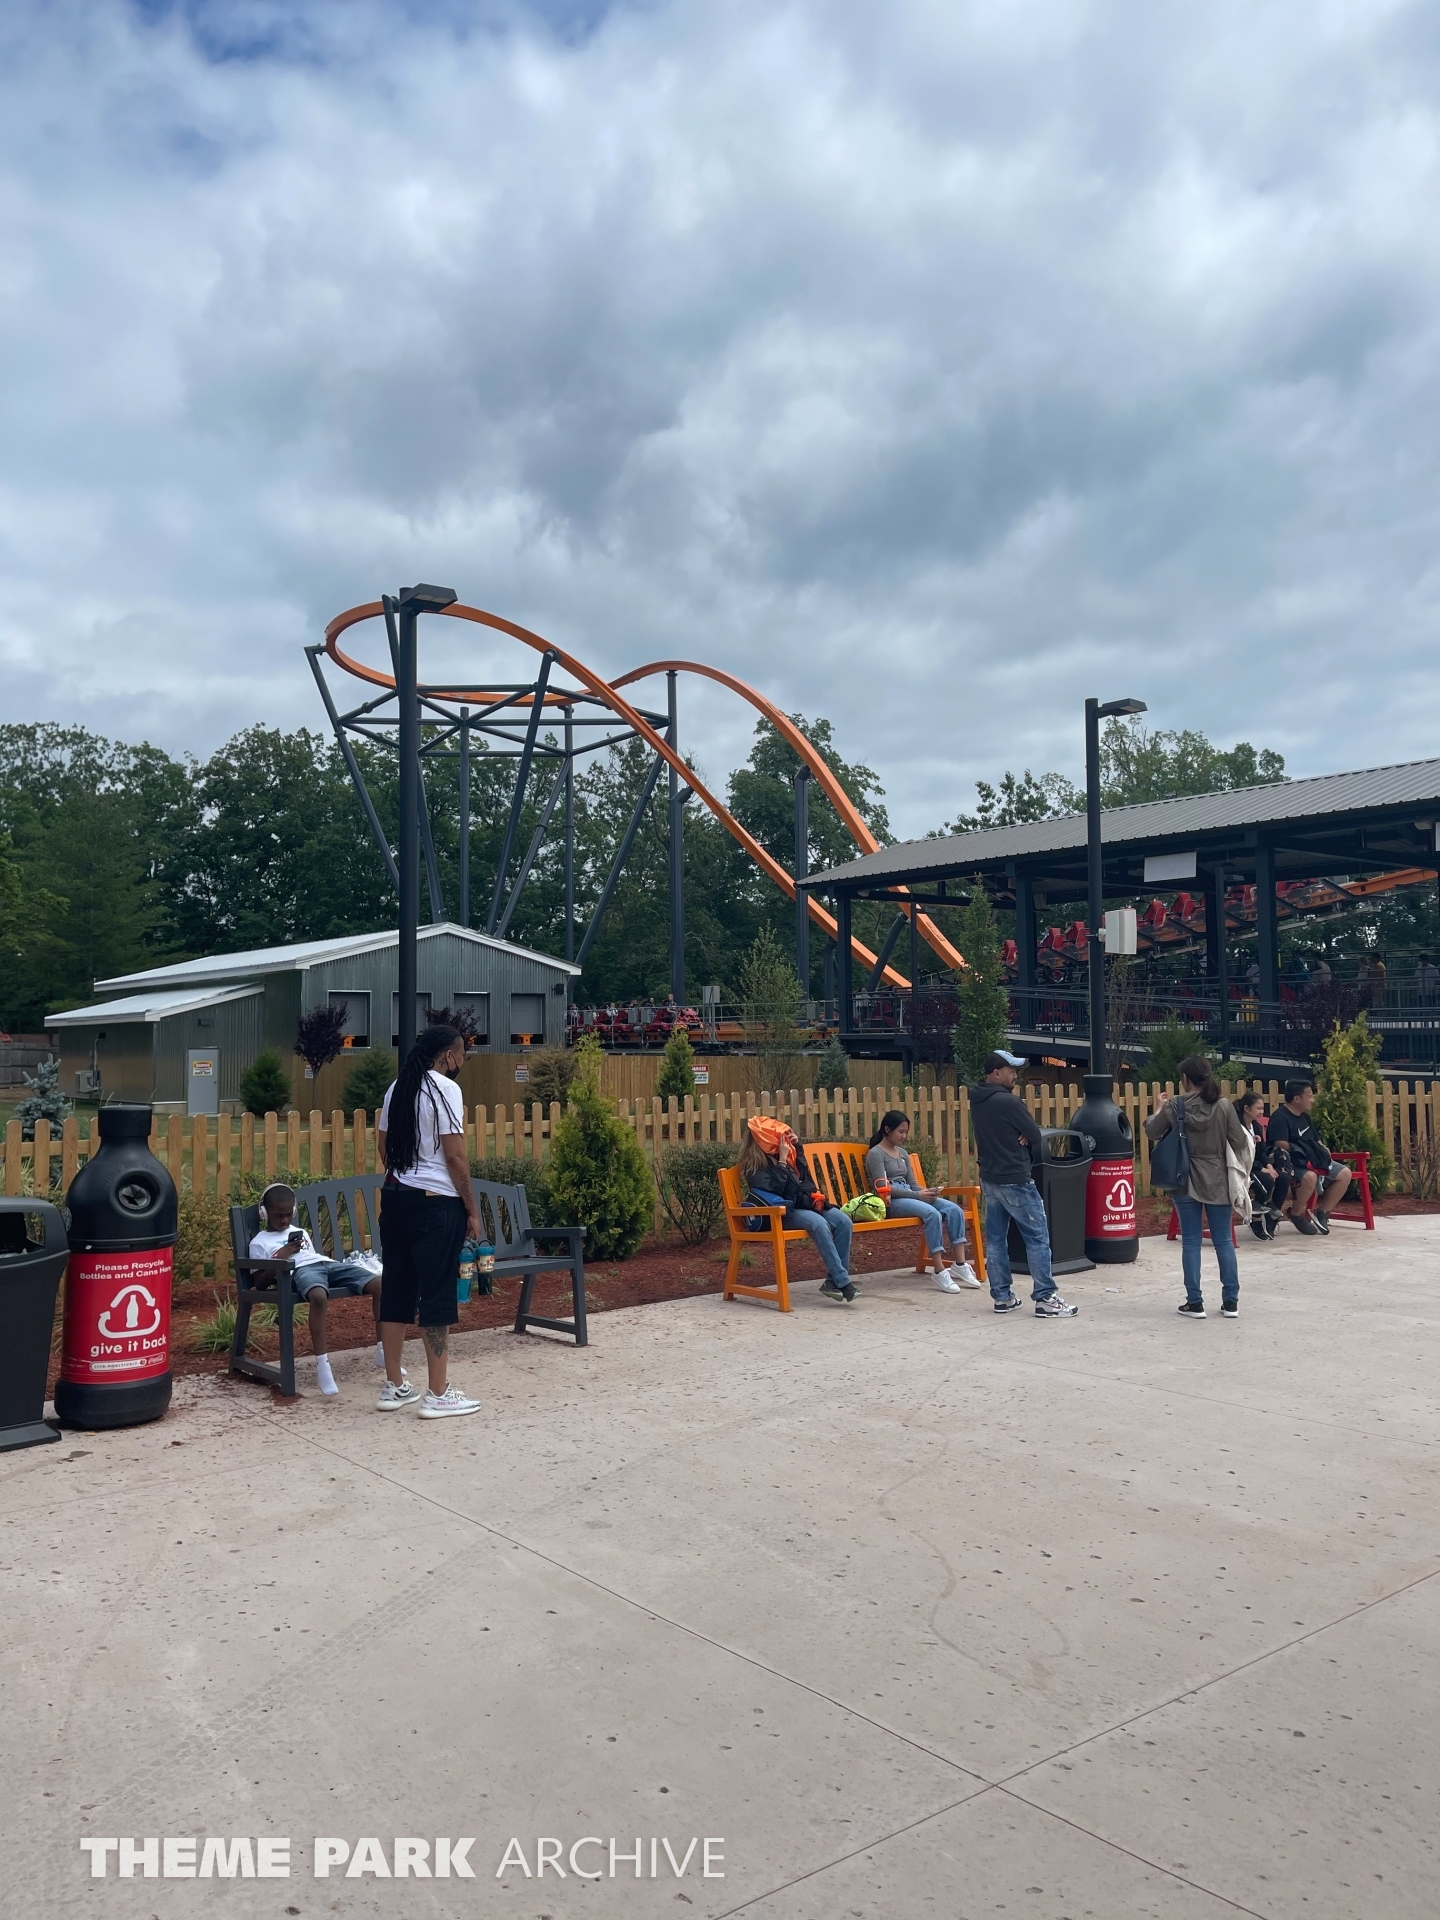 Jersey Devil Coaster at Six Flags Great Adventure